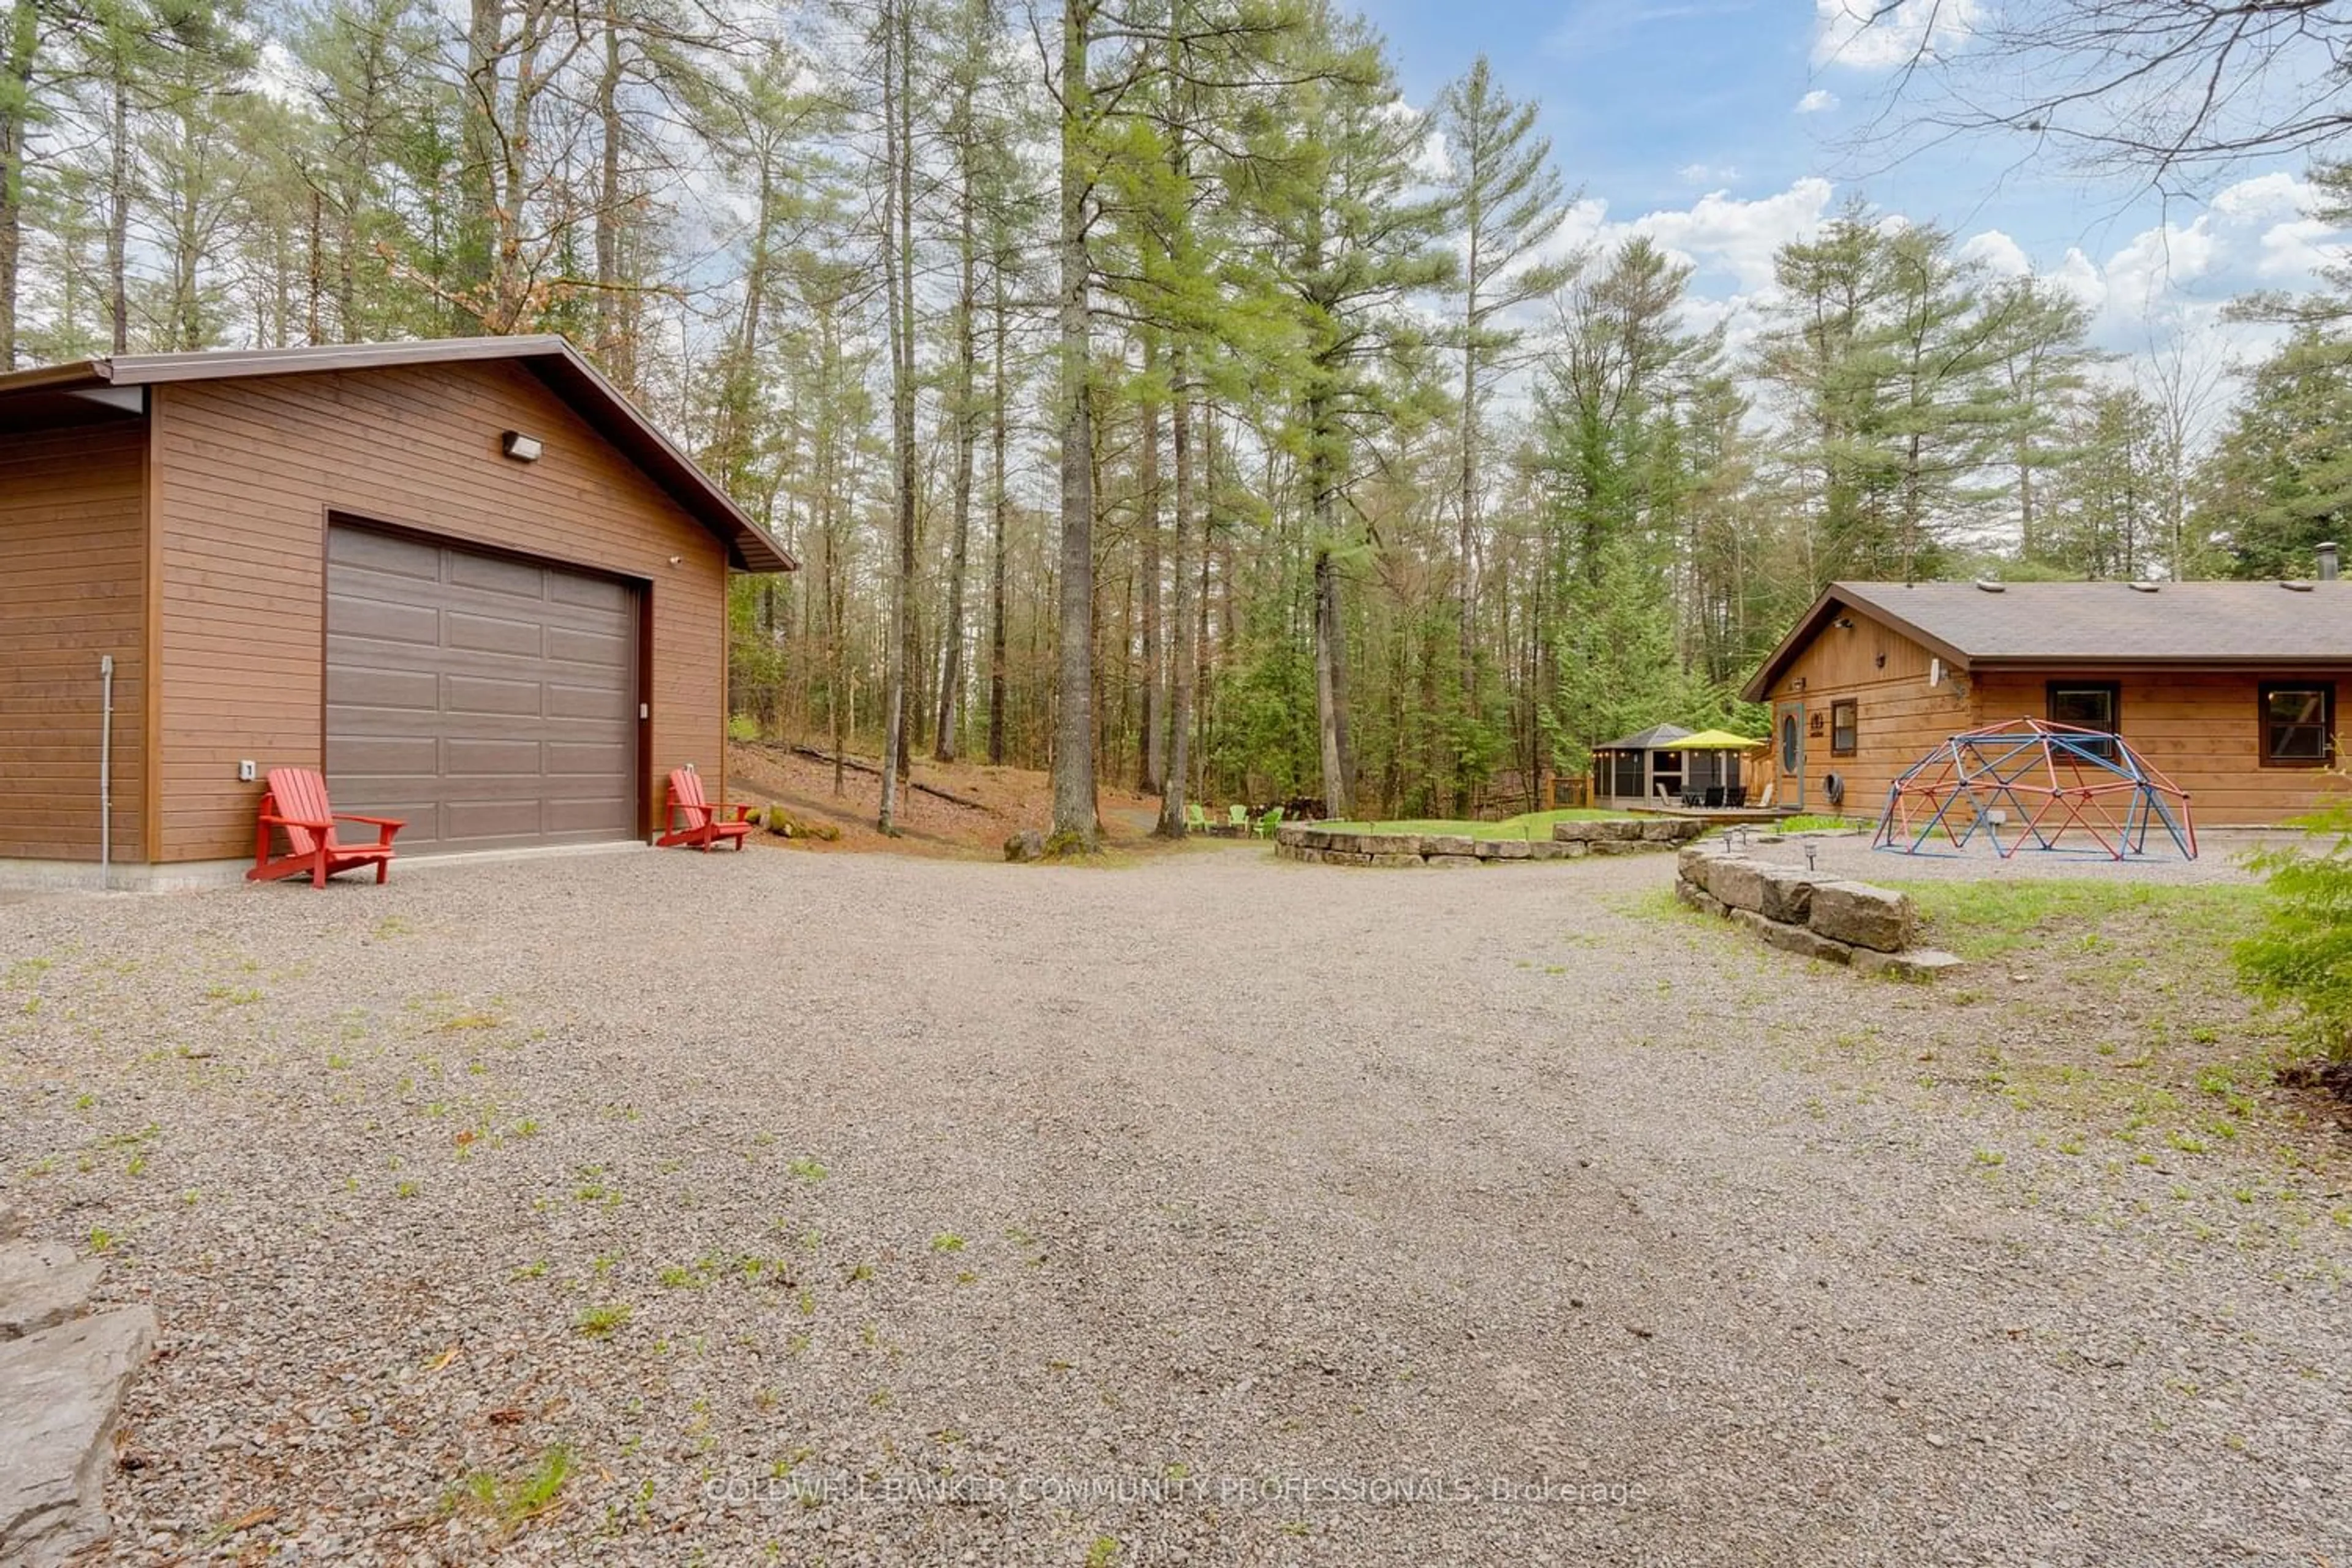 Cottage for 24 East Clear Bay Rd, Kawartha Lakes Ontario K0M 2A0